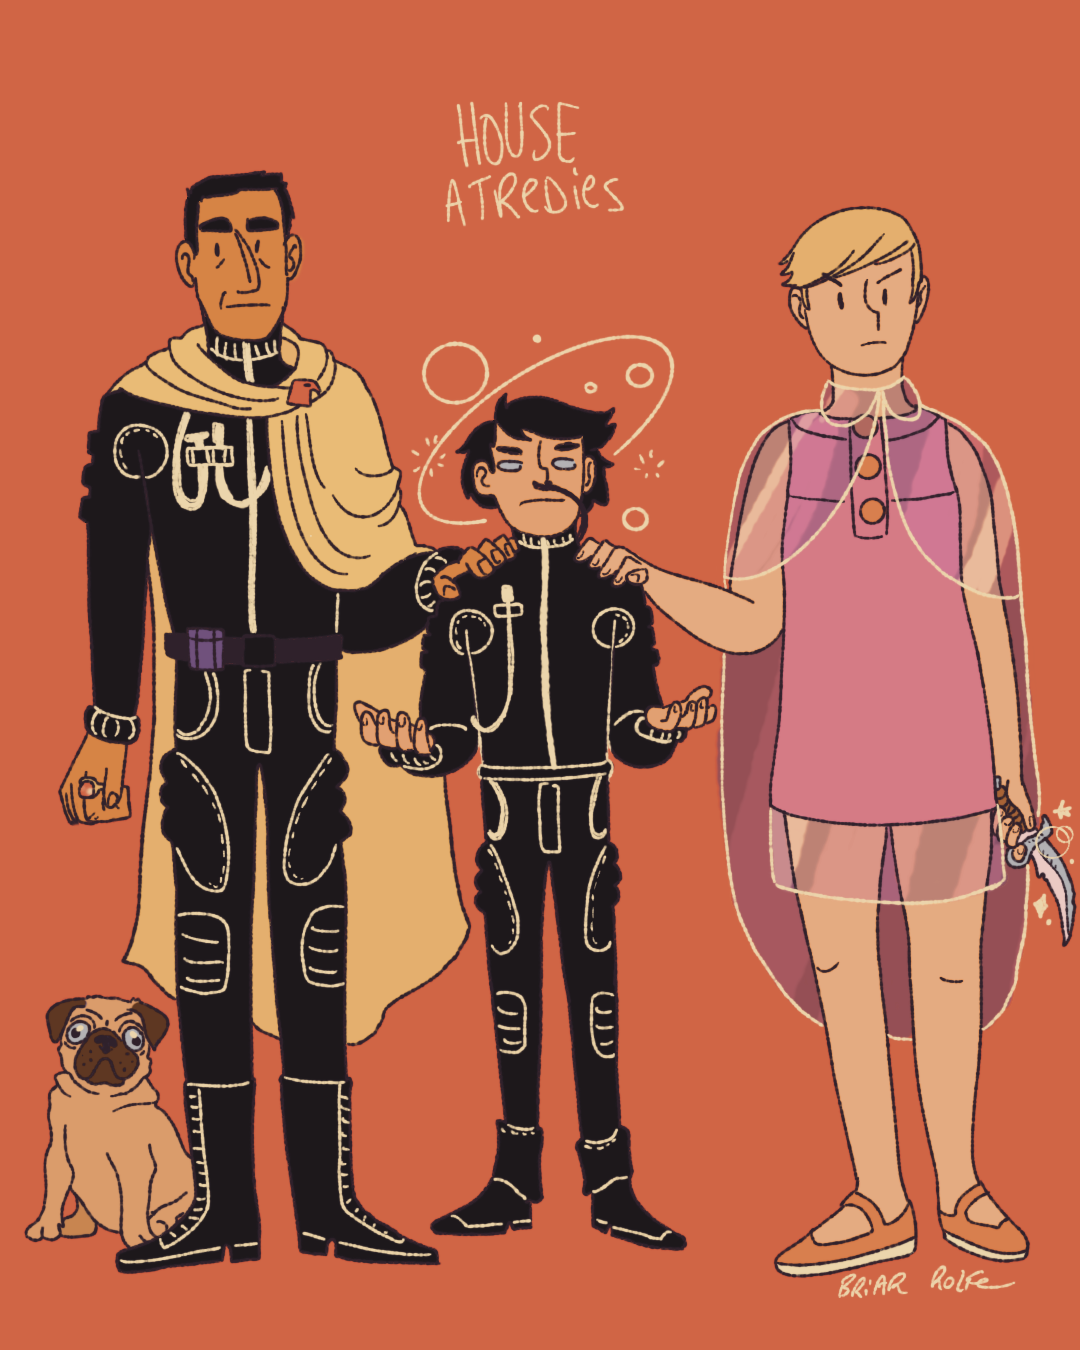 paul, duke leto, and lady jessica from Dune. Paul looks zoned out and unhinged